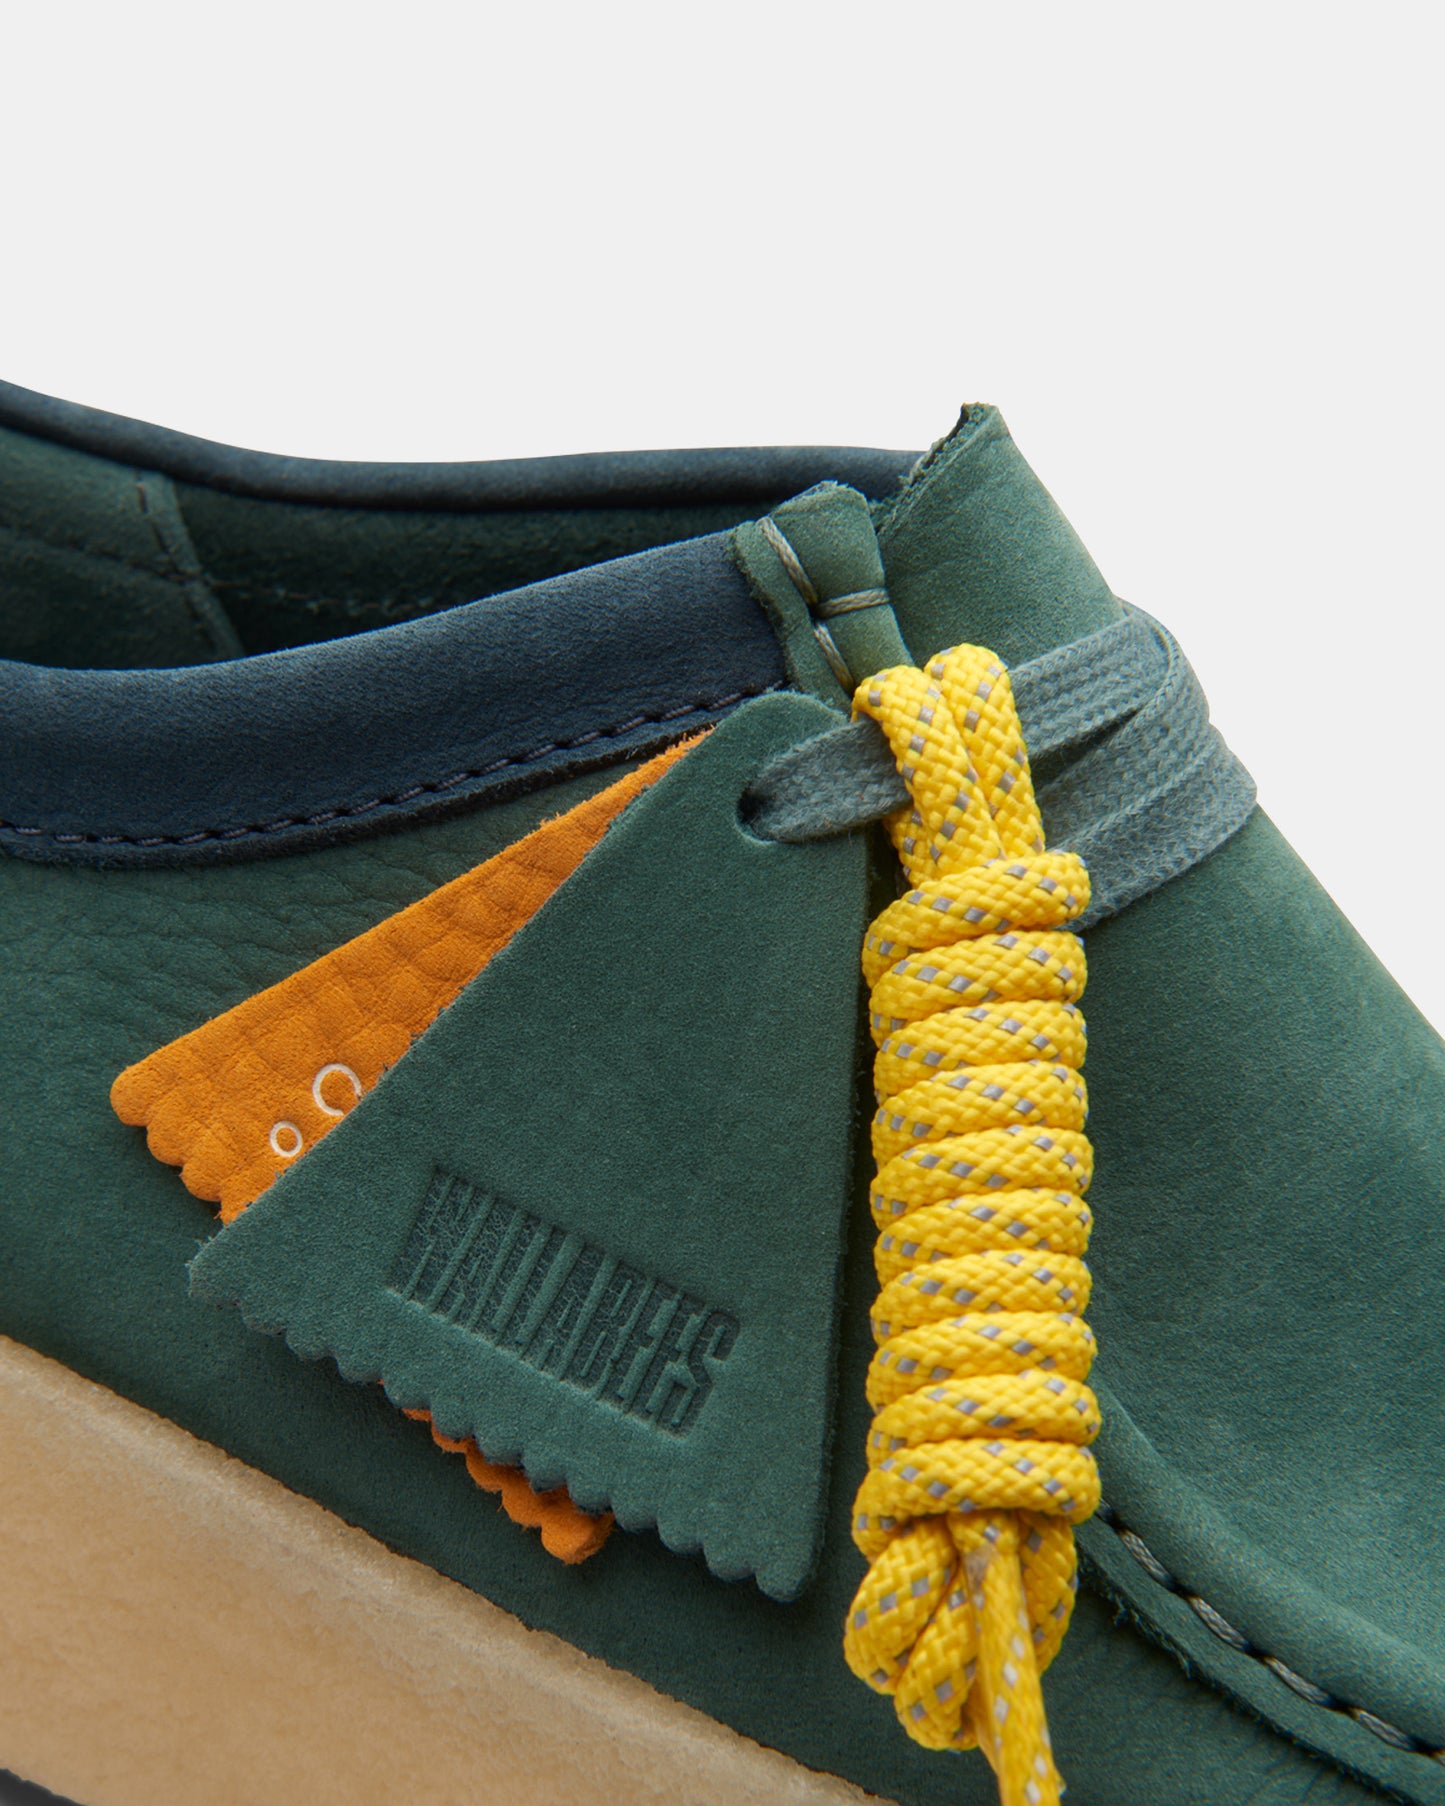 Wallabee Cup (M) Teal